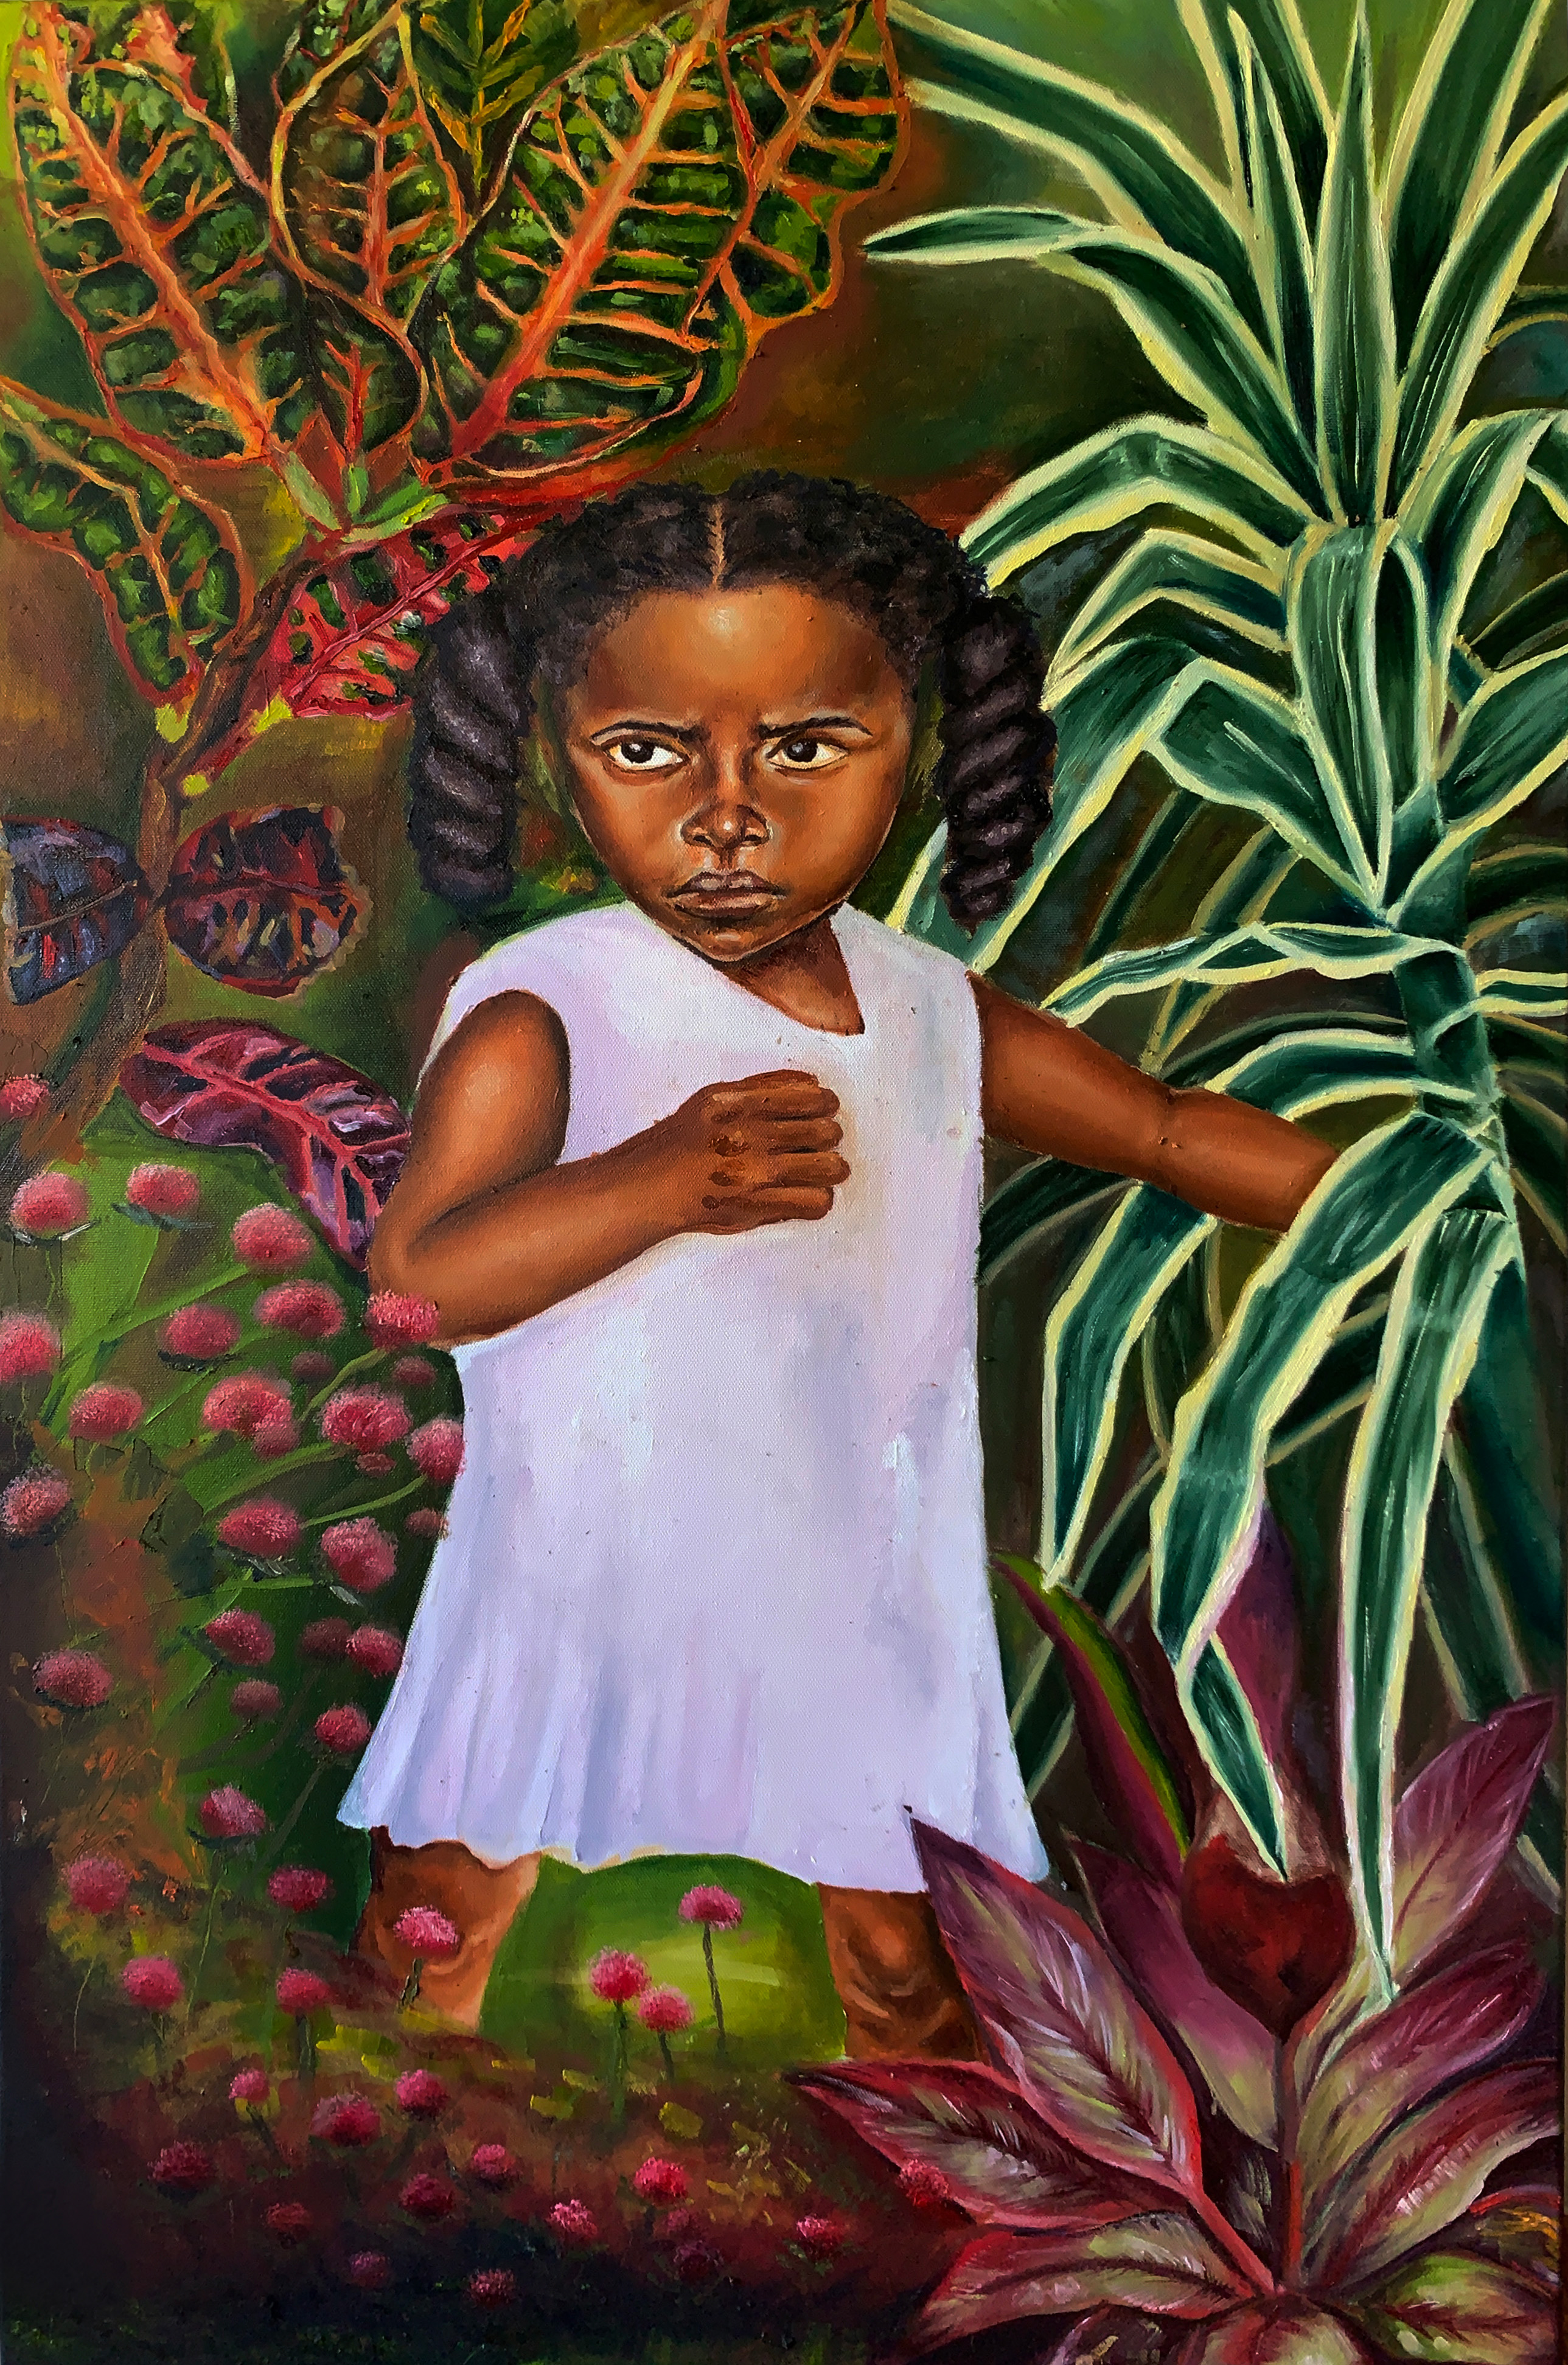 painting by Keshawna Logan depicting a stern looking child in a leafy garden